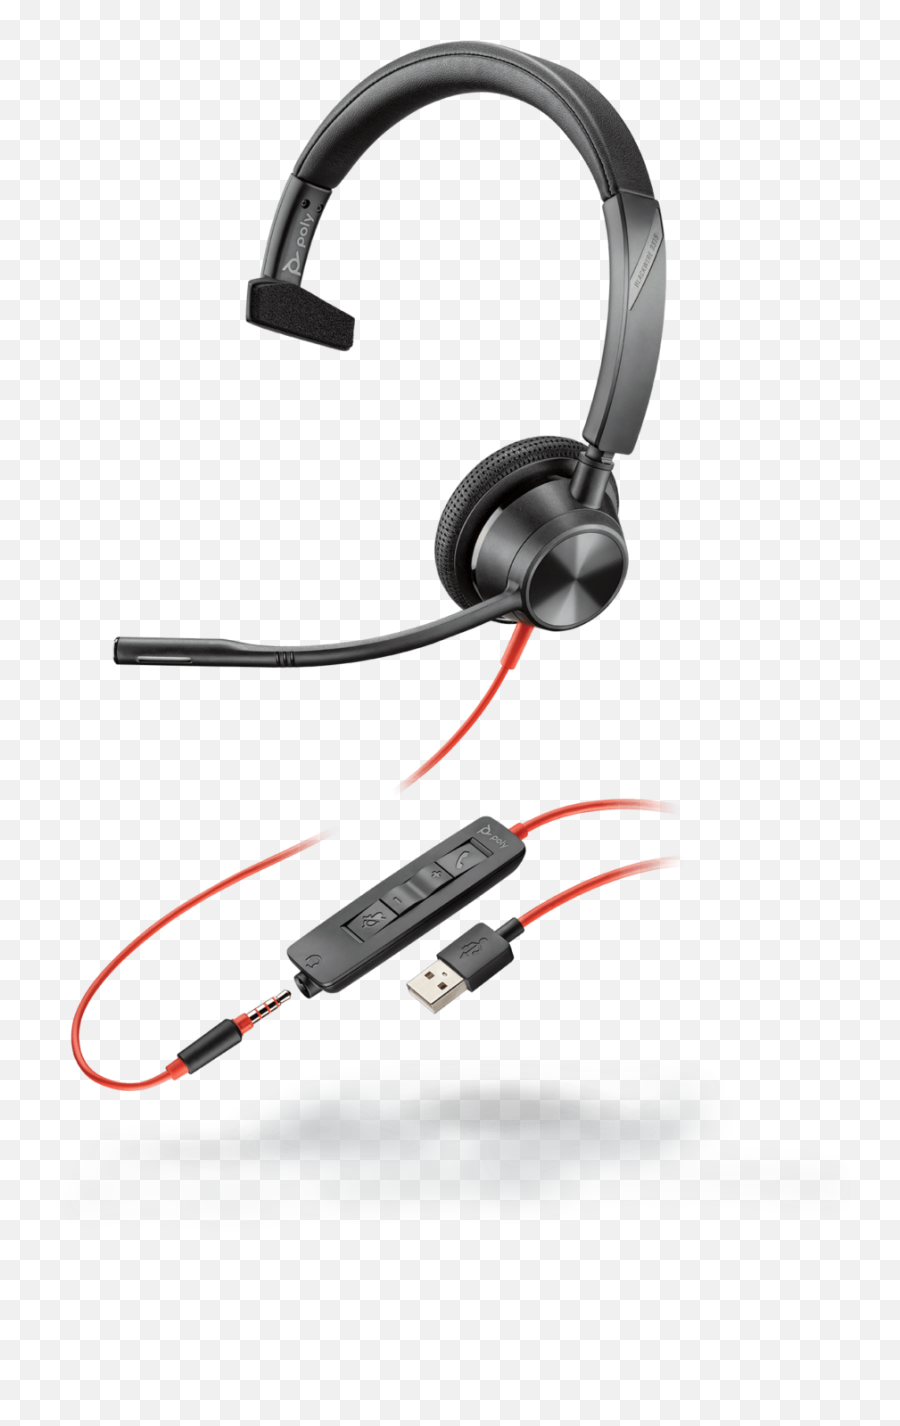 The Best Headsets For Conference Calls - Poly Blackwire 3325 Emoji,Headphones Transparent Background